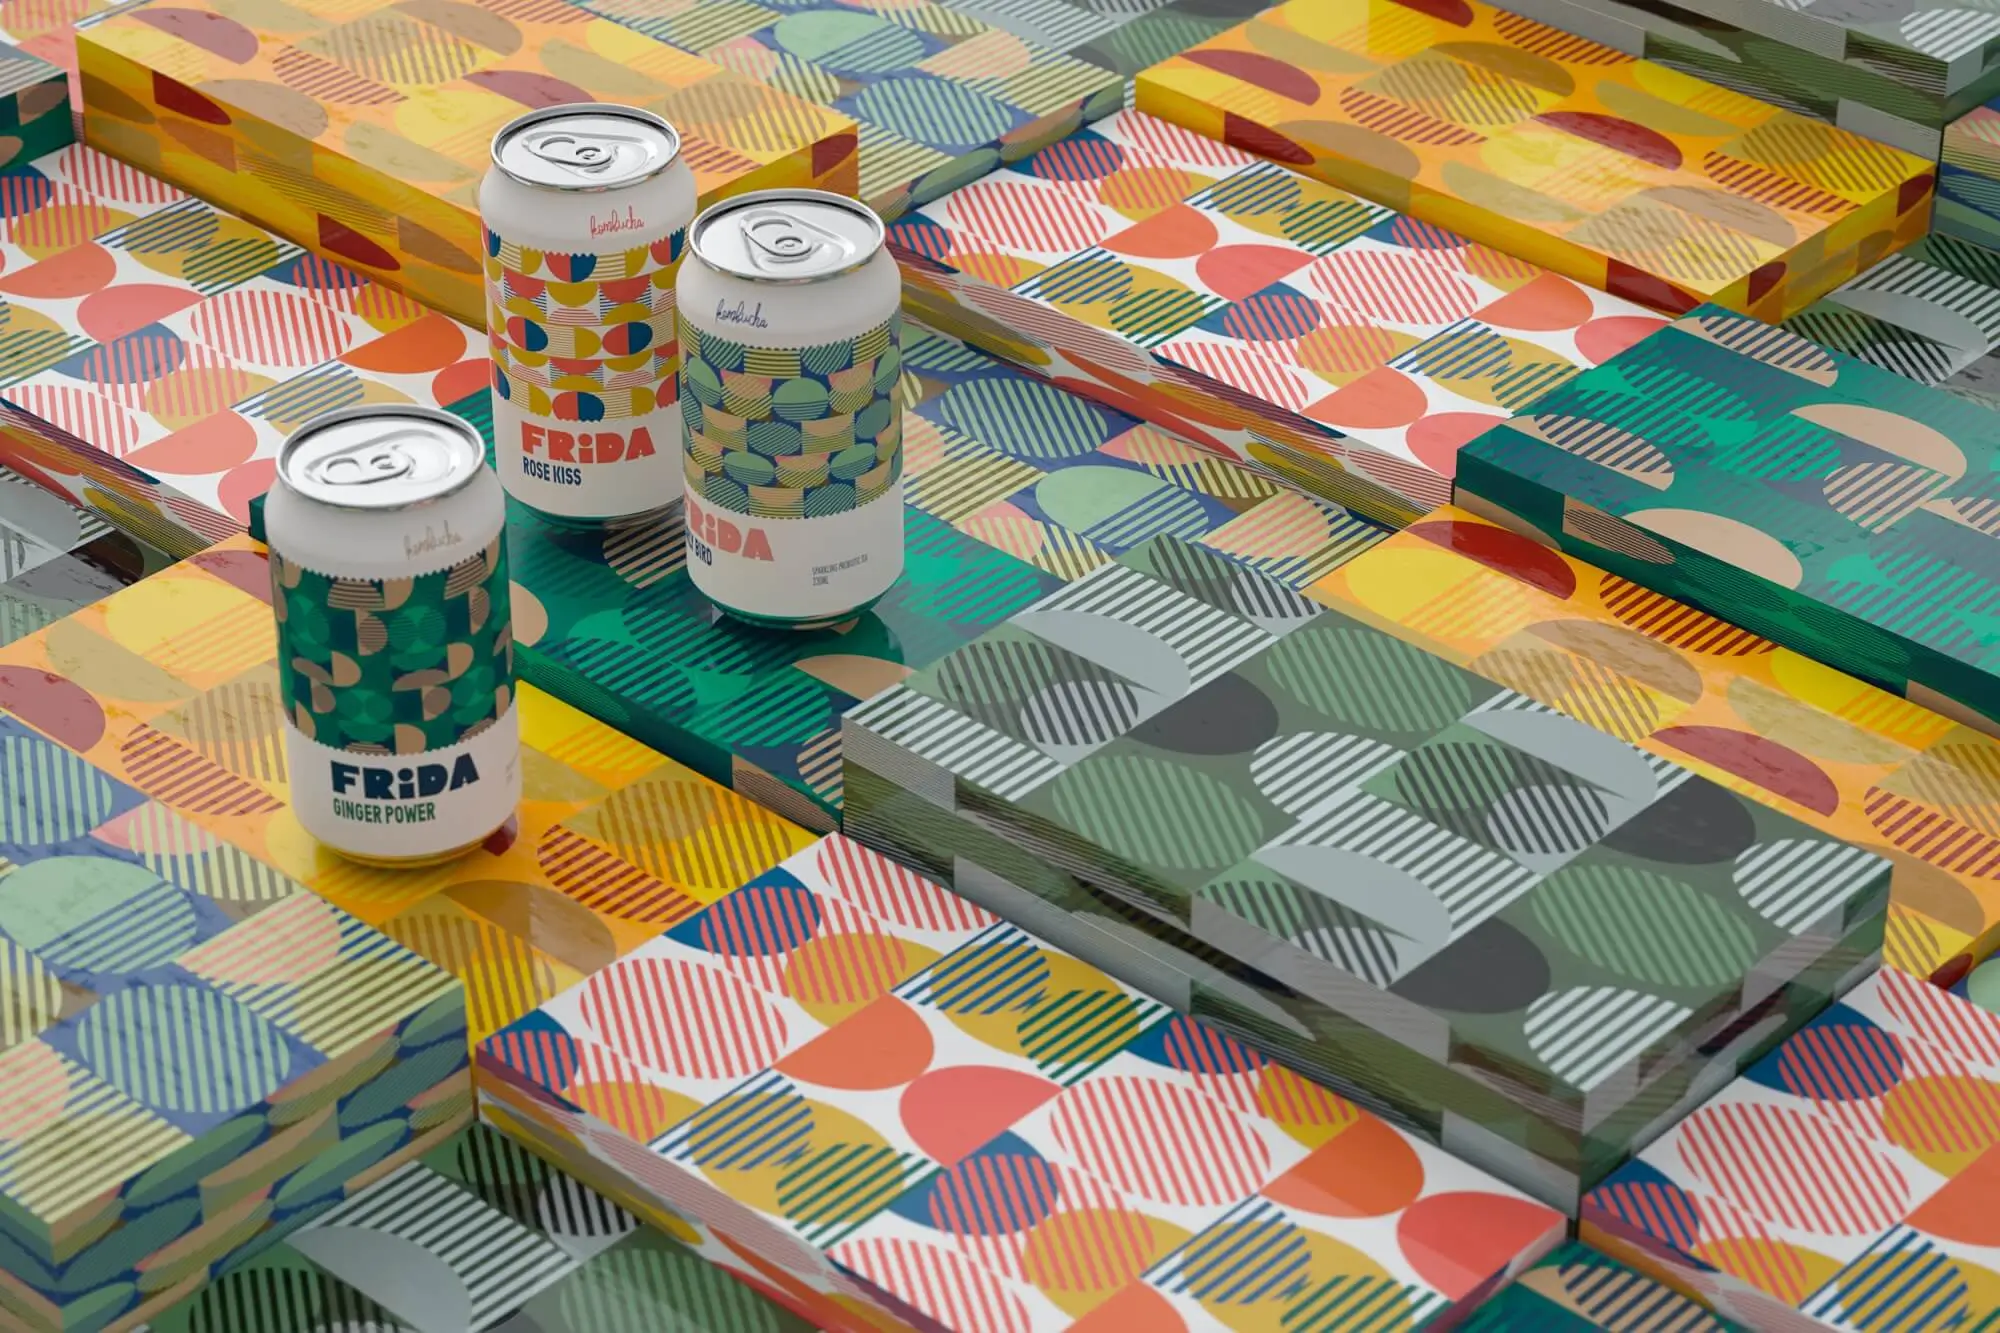 Brightly colored cans and boxes with geometric shapes